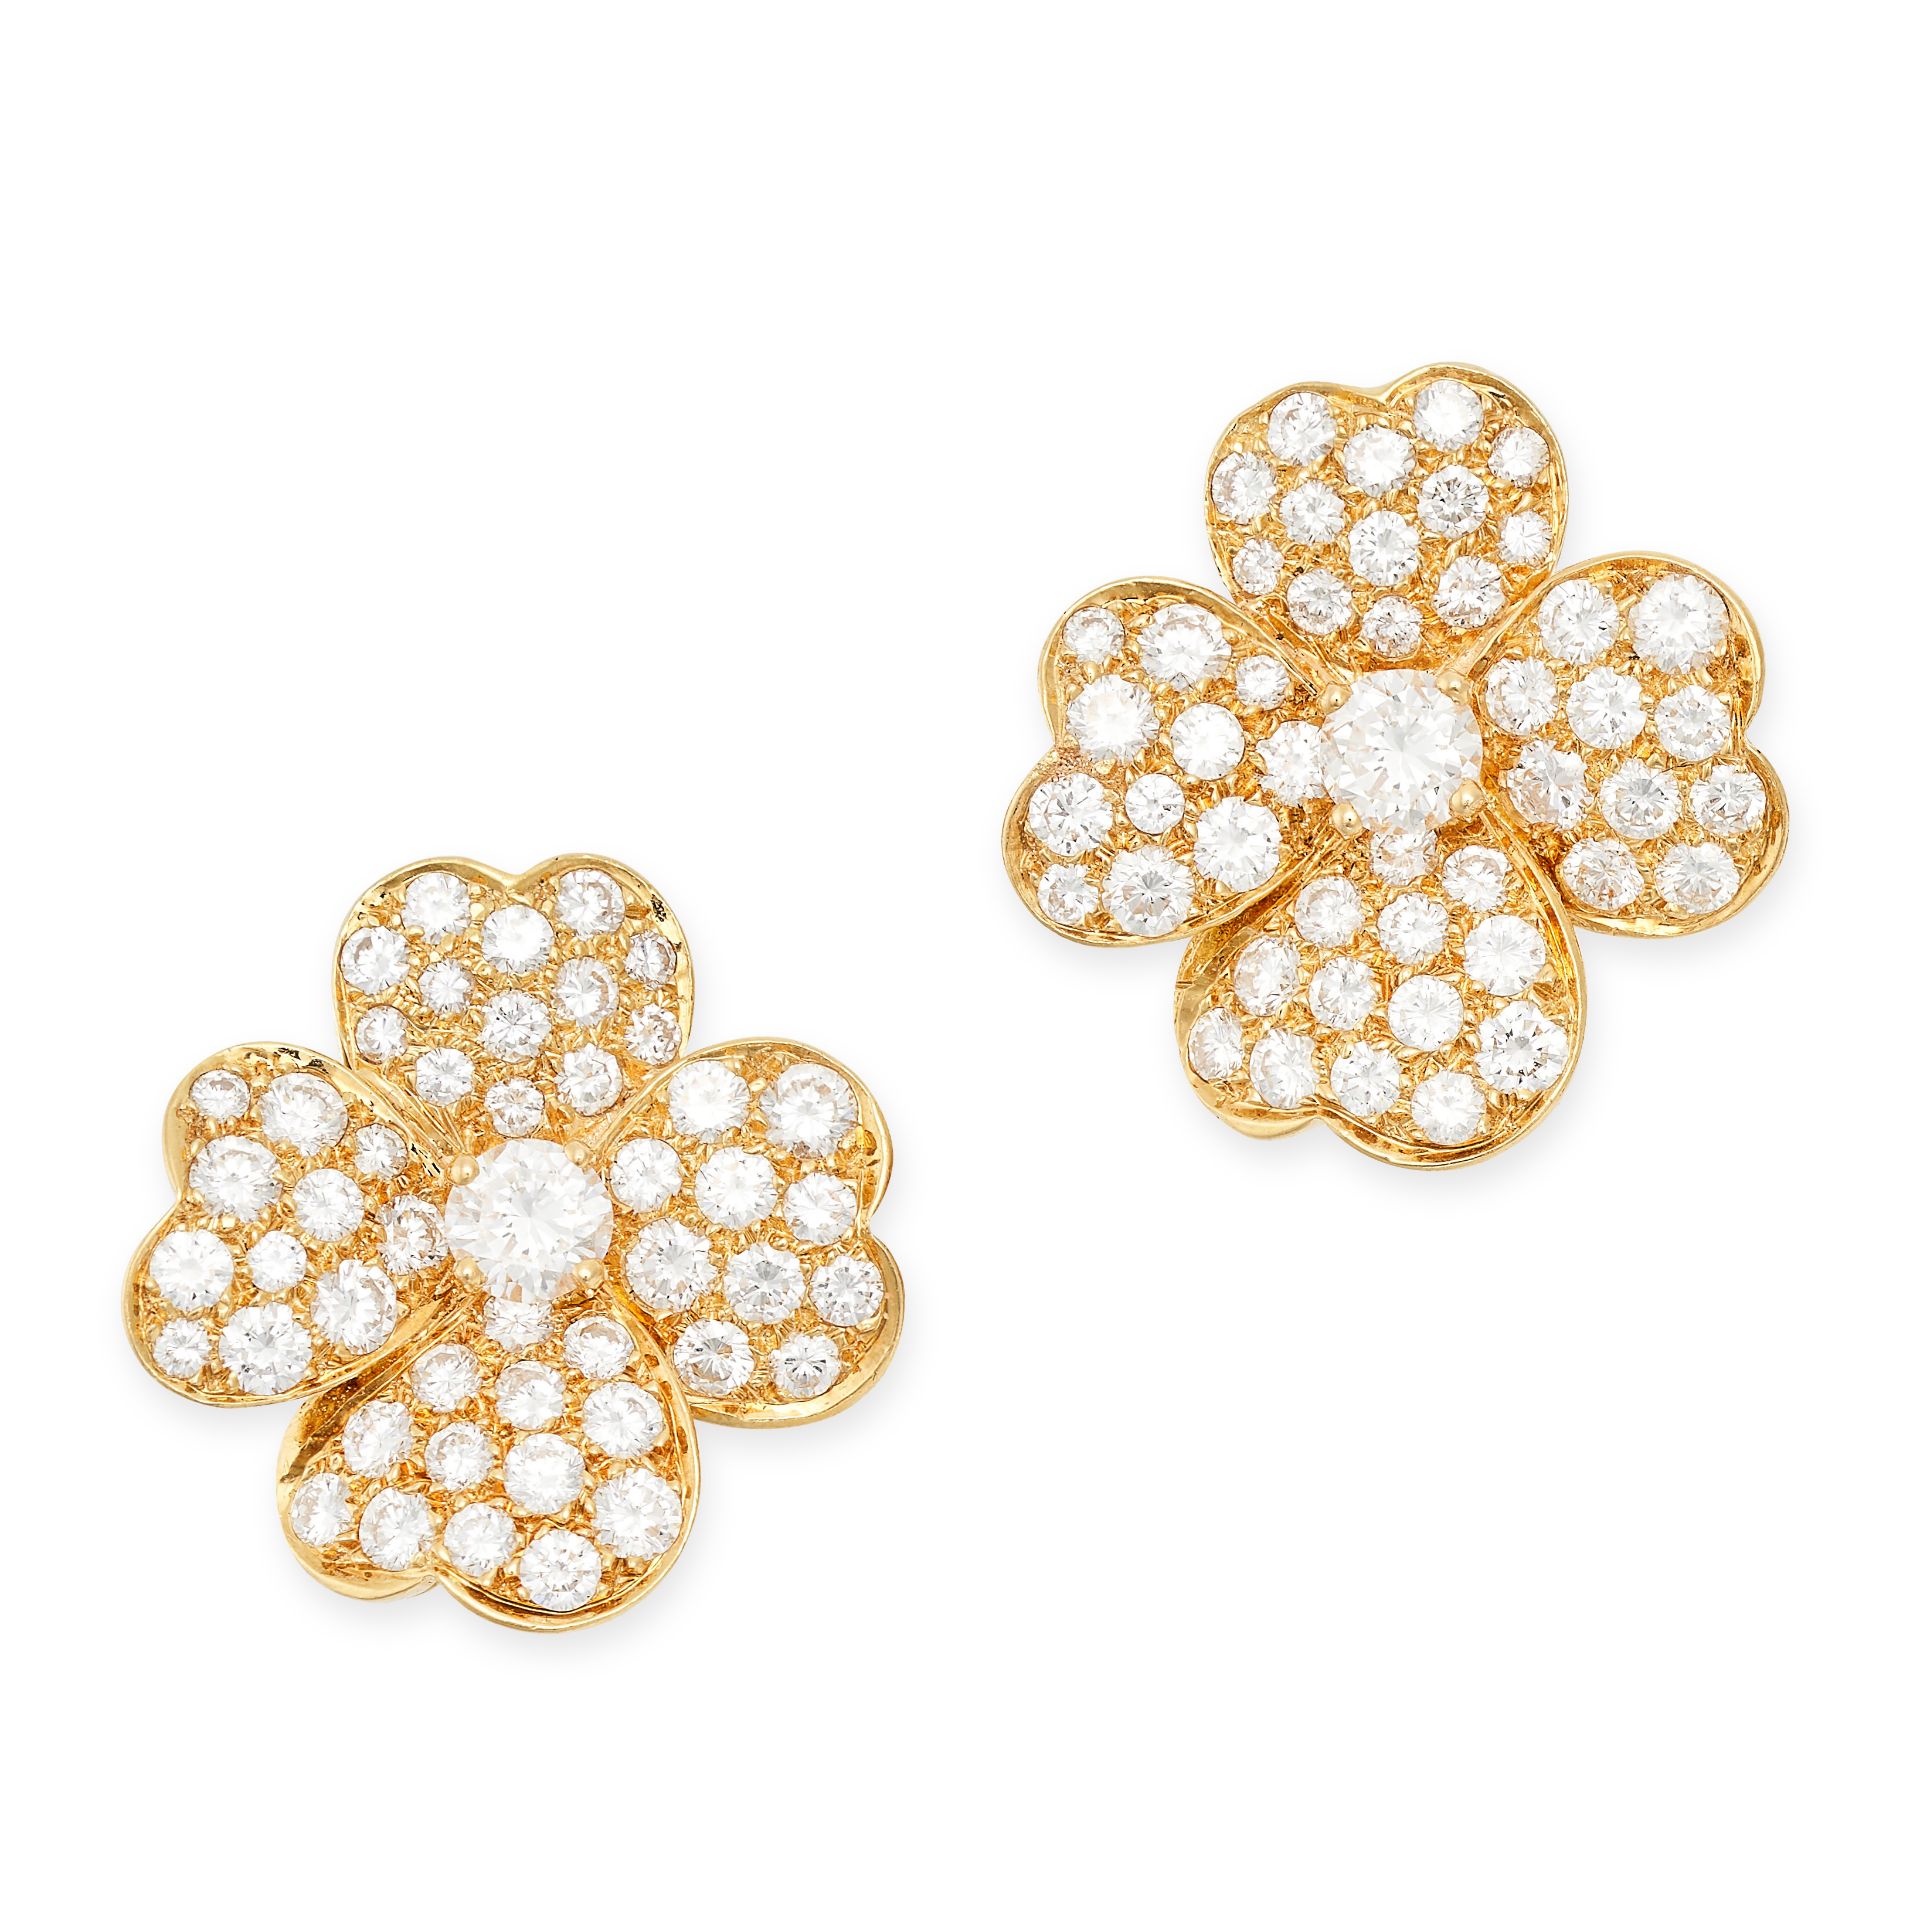 VAN CLEEF & ARPELS, A PAIR OF DIAMOND COSMOS CLIP EARRINGS in 18ct yellow gold, each designed as a